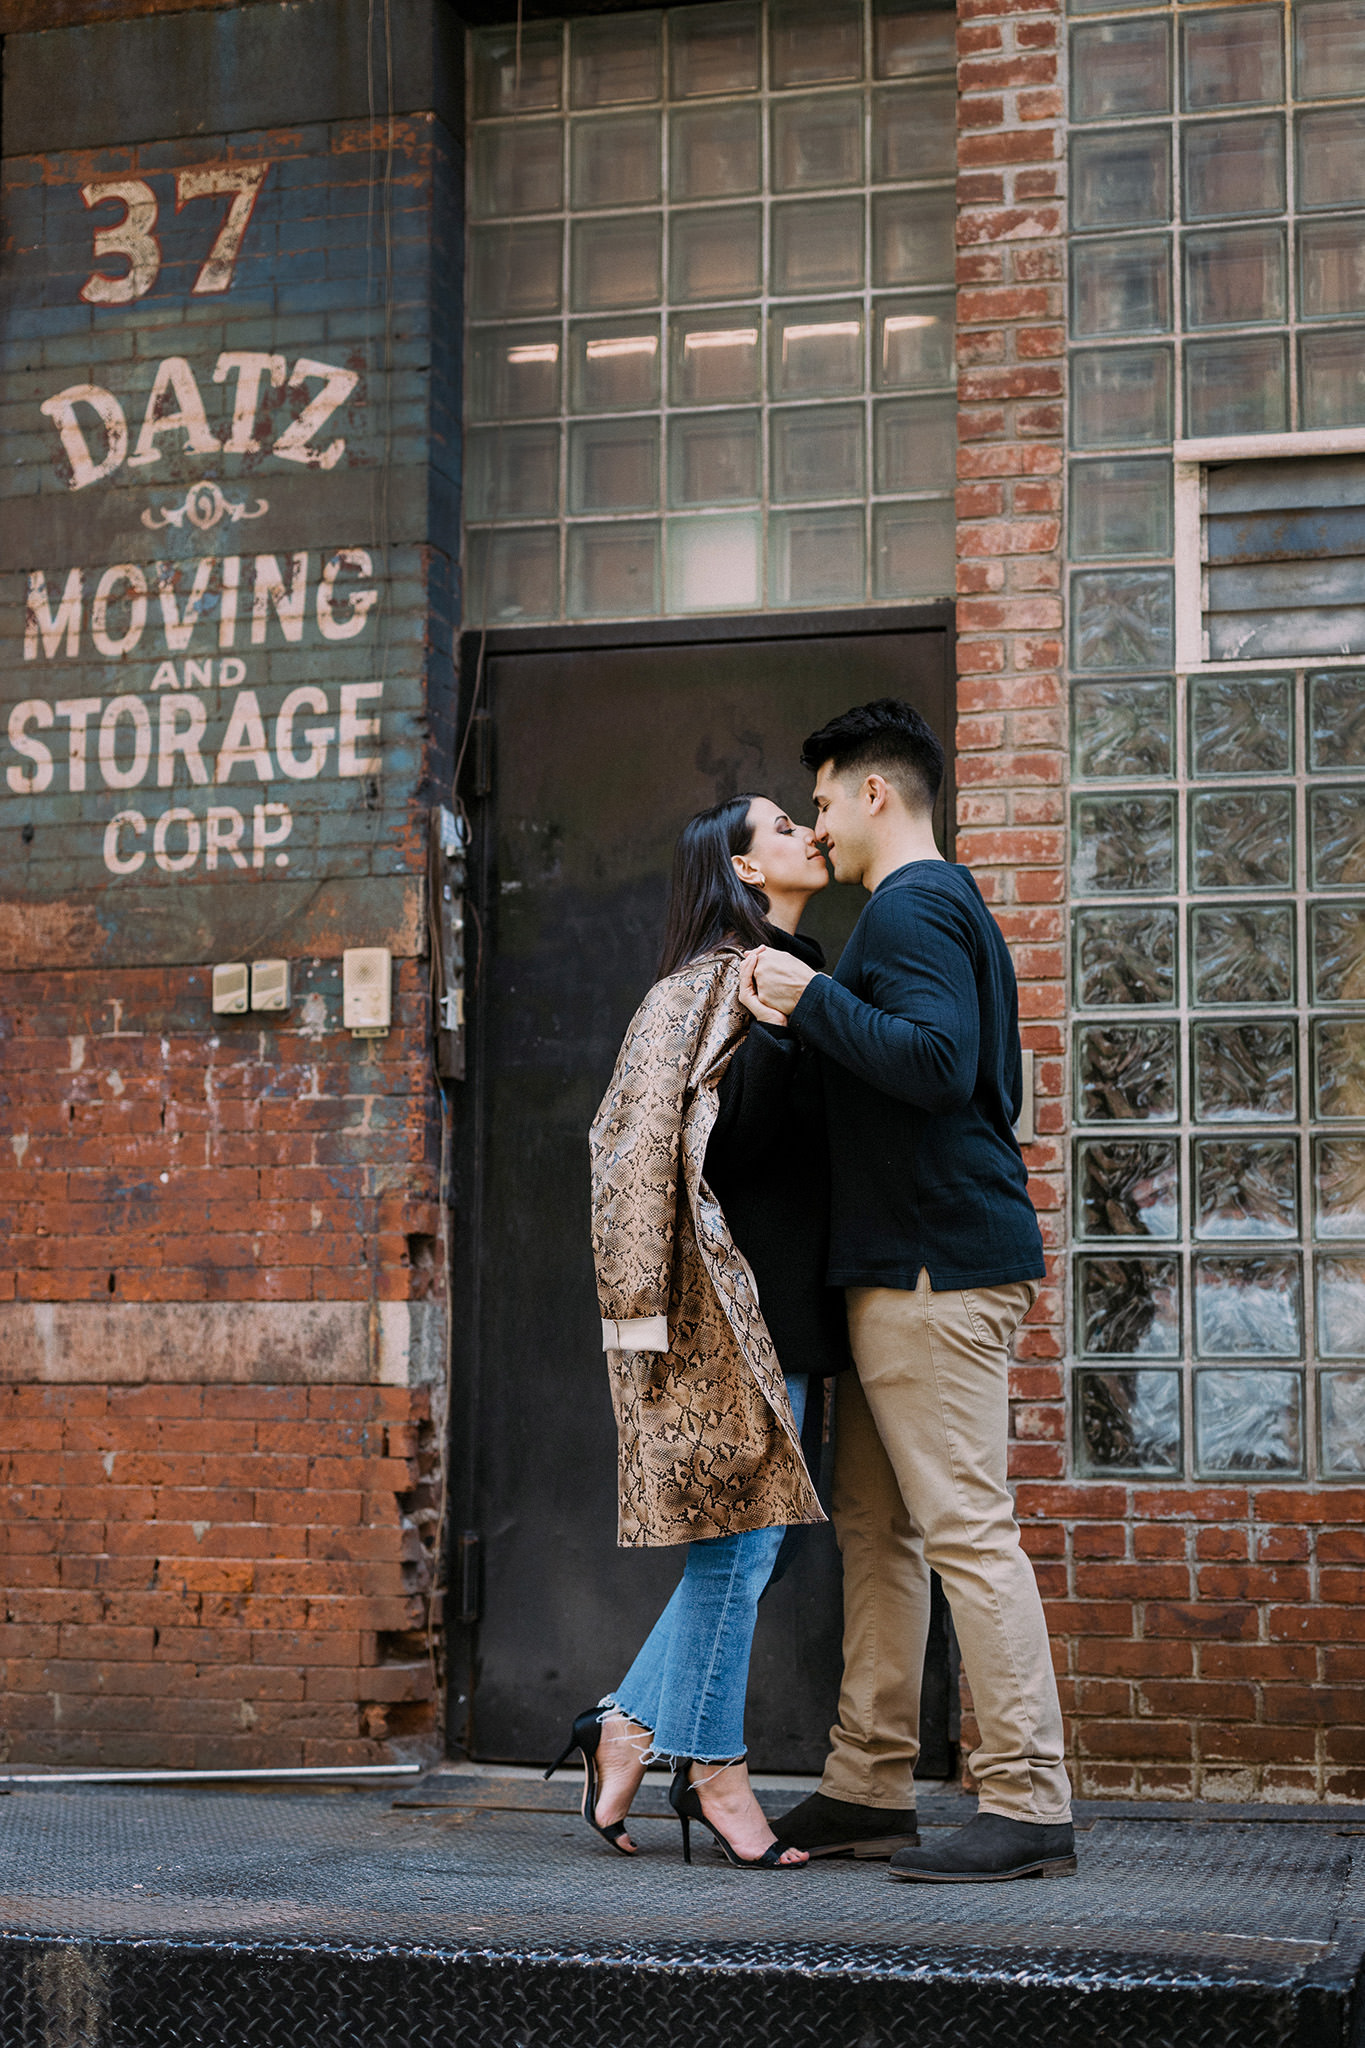 Couple about to kiss in front of old brick building with Datz Moving and Storage Corp sign